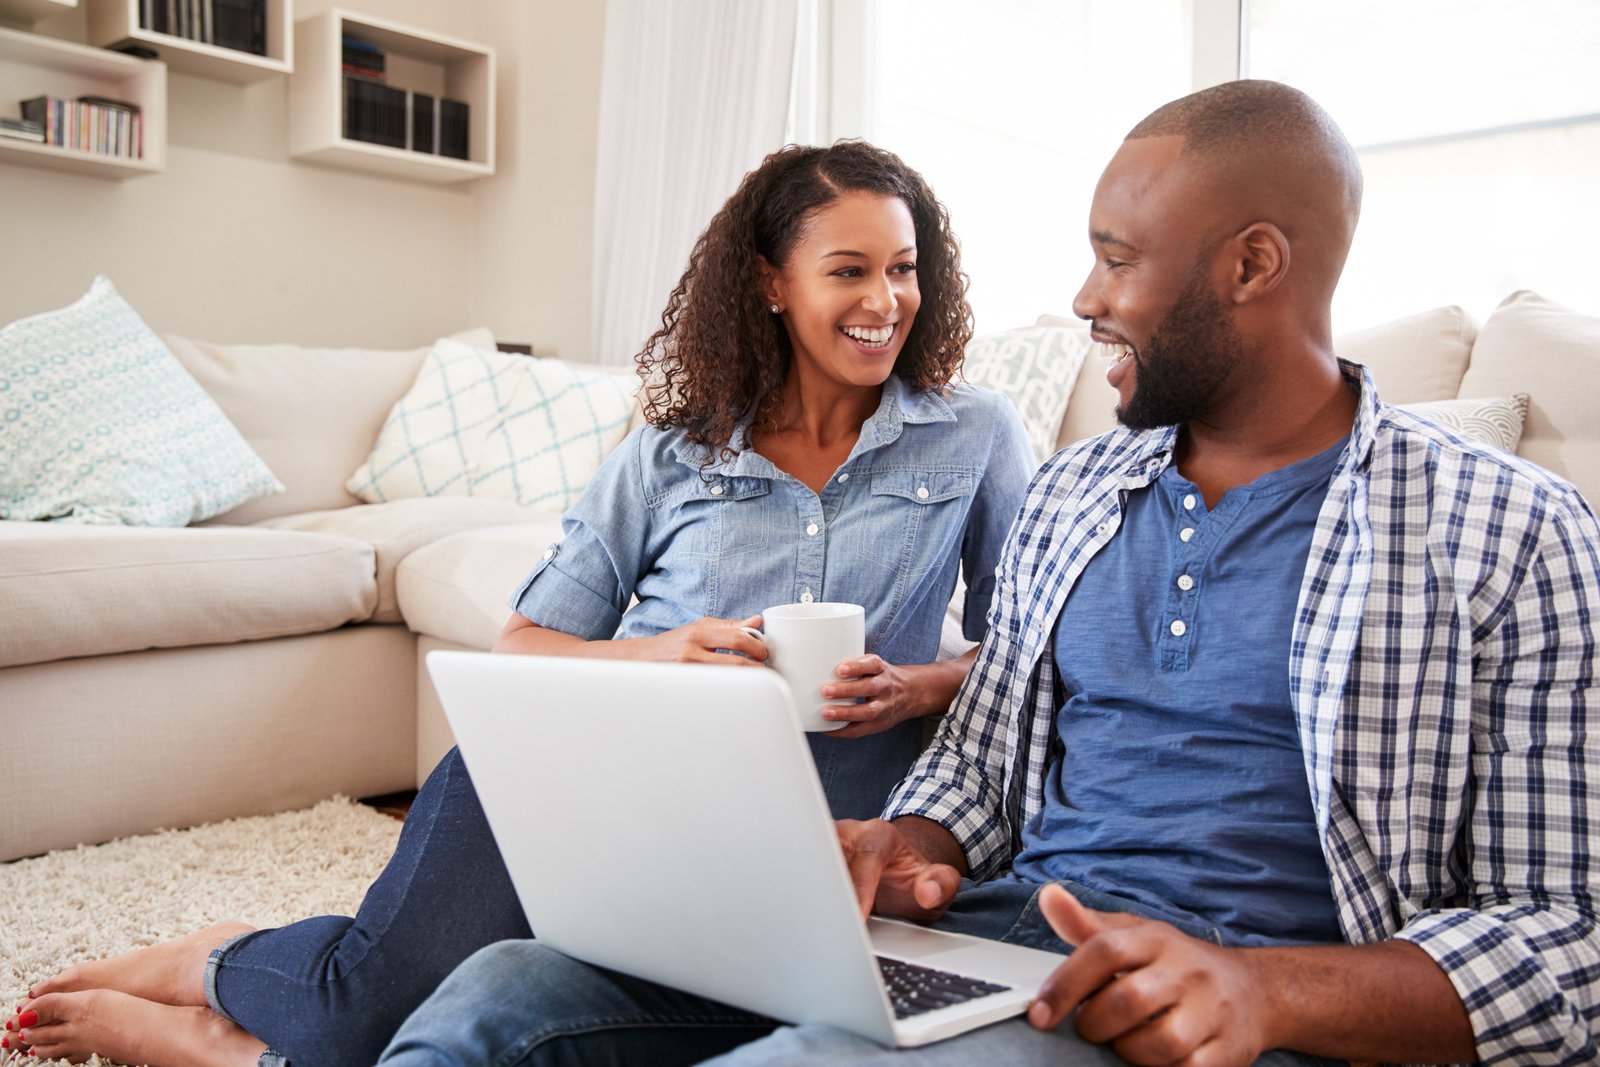 Couple budgetting together on laptop while drinking coffee smiling